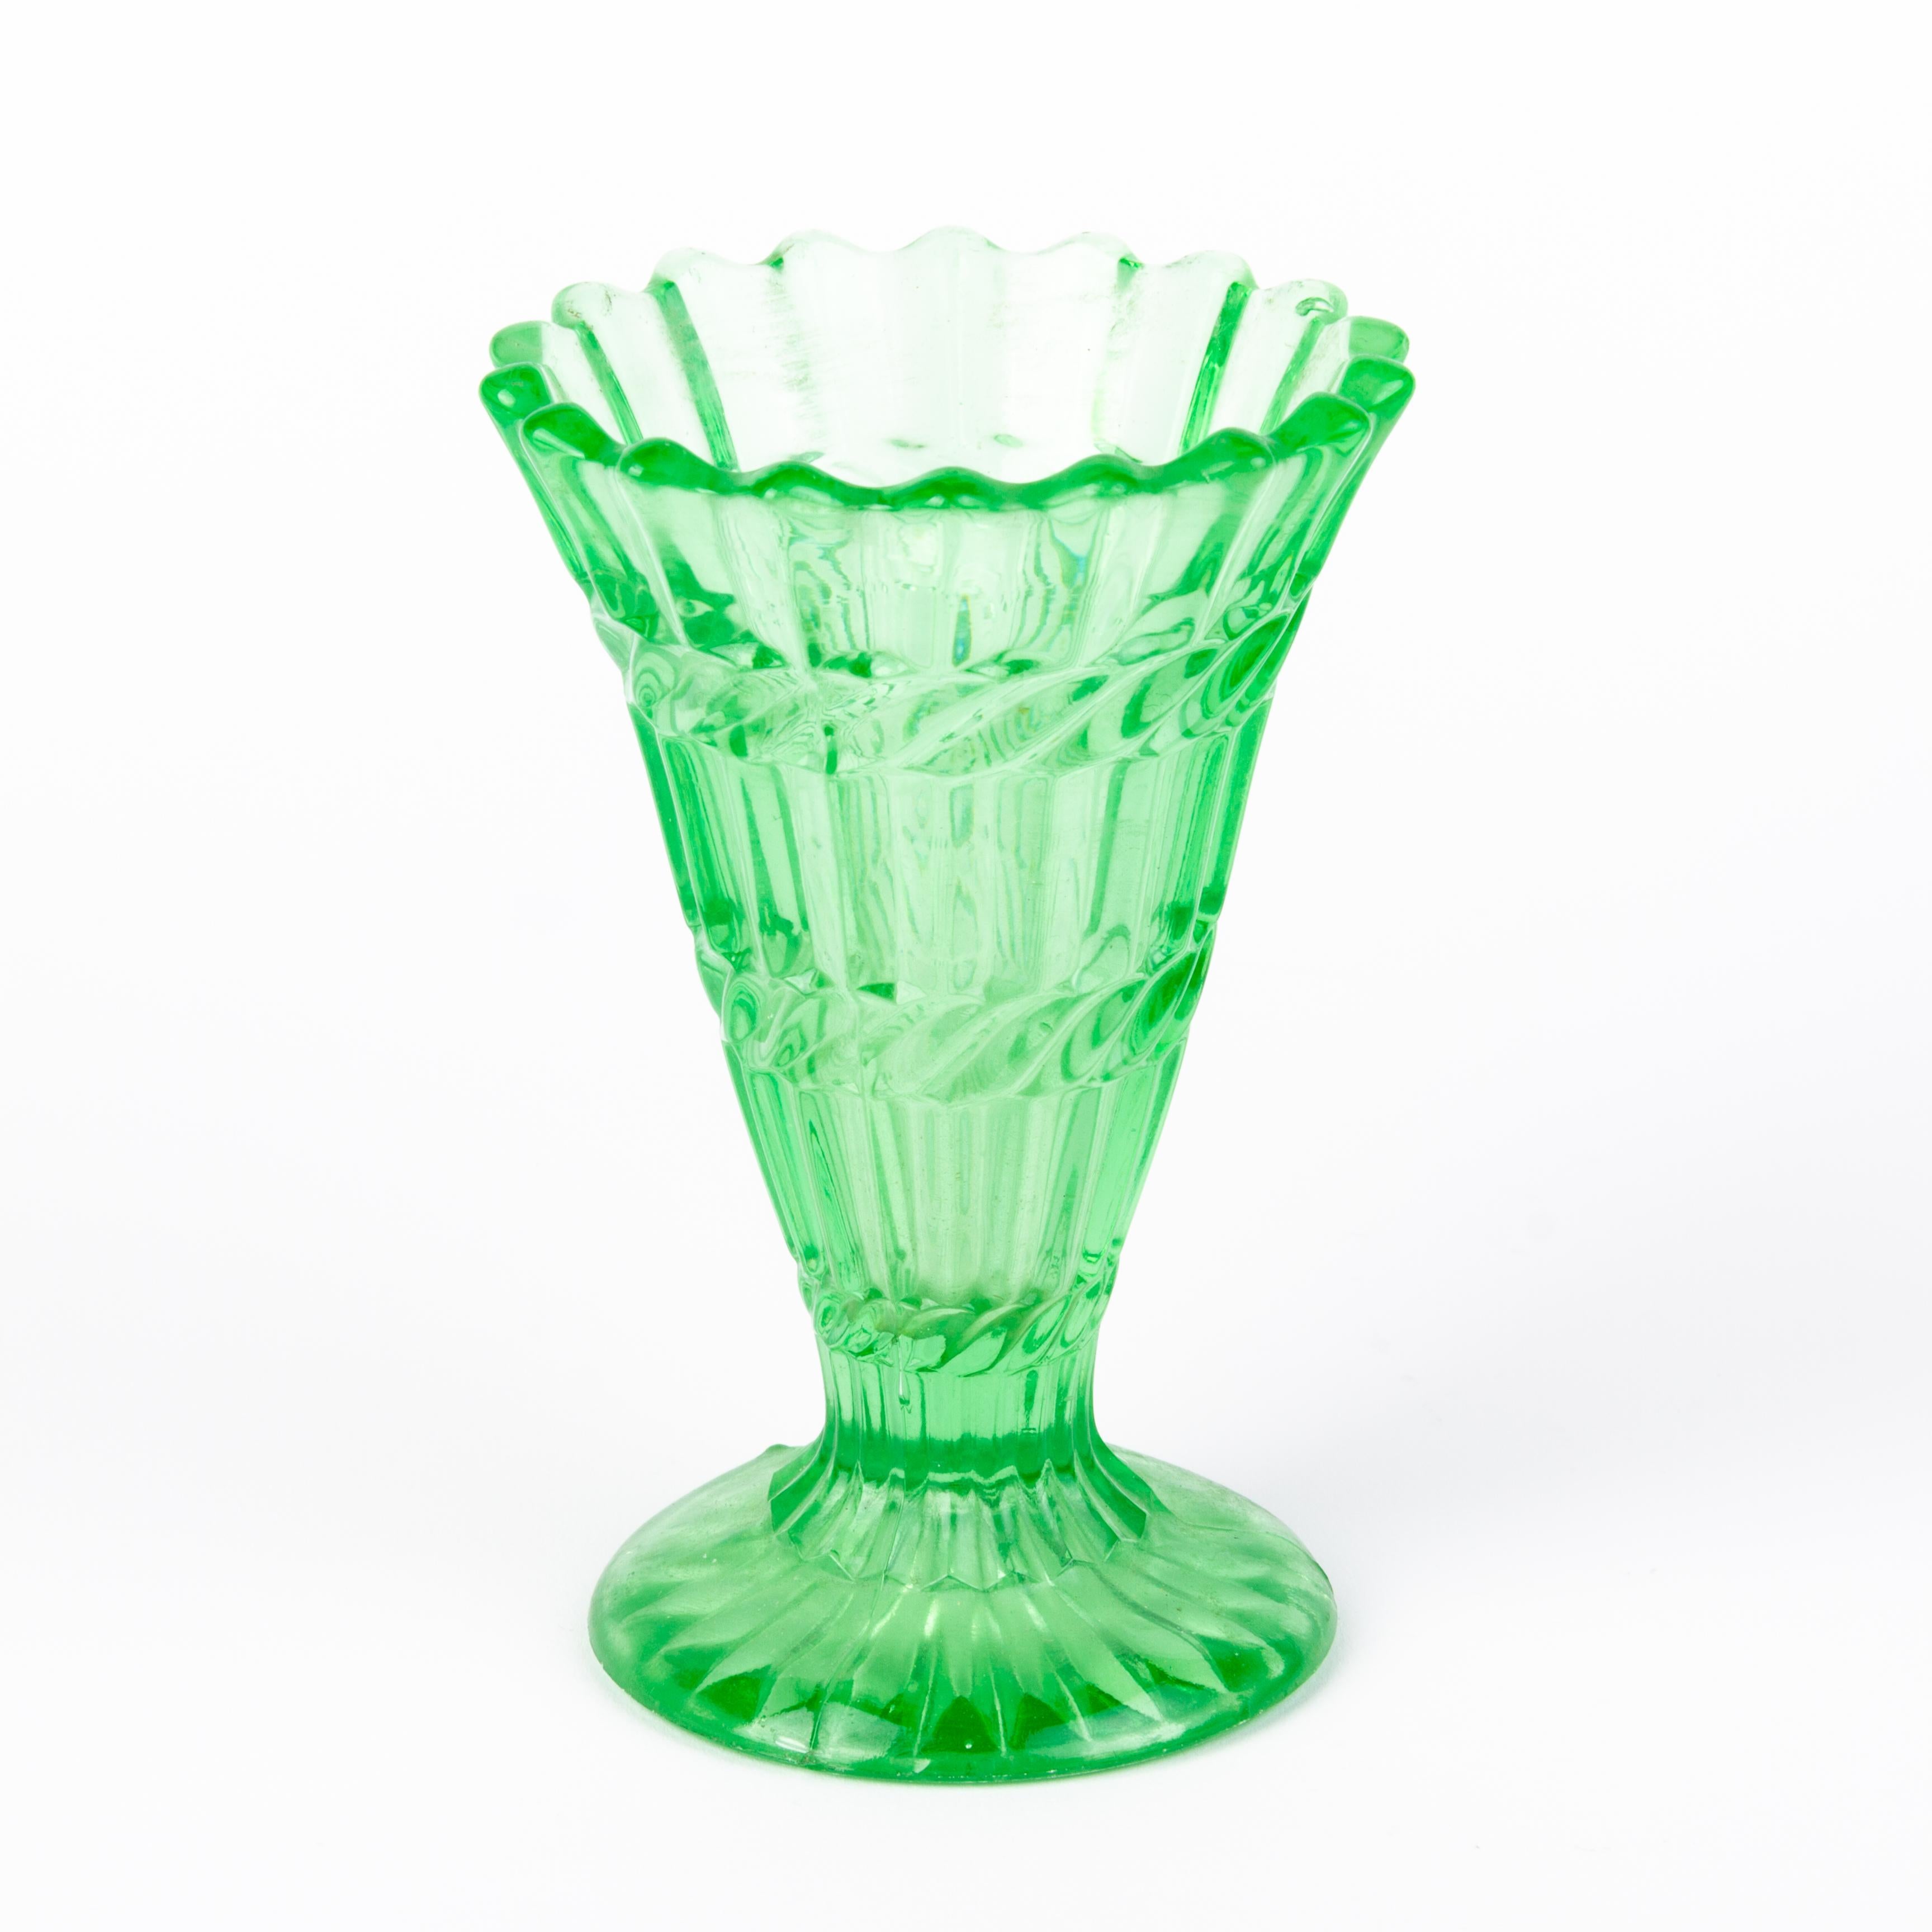 Art Deco Uranium Glass Fluted Centerpiece Vase 1930s
Good condition
From a private collection.
Free international shipping.